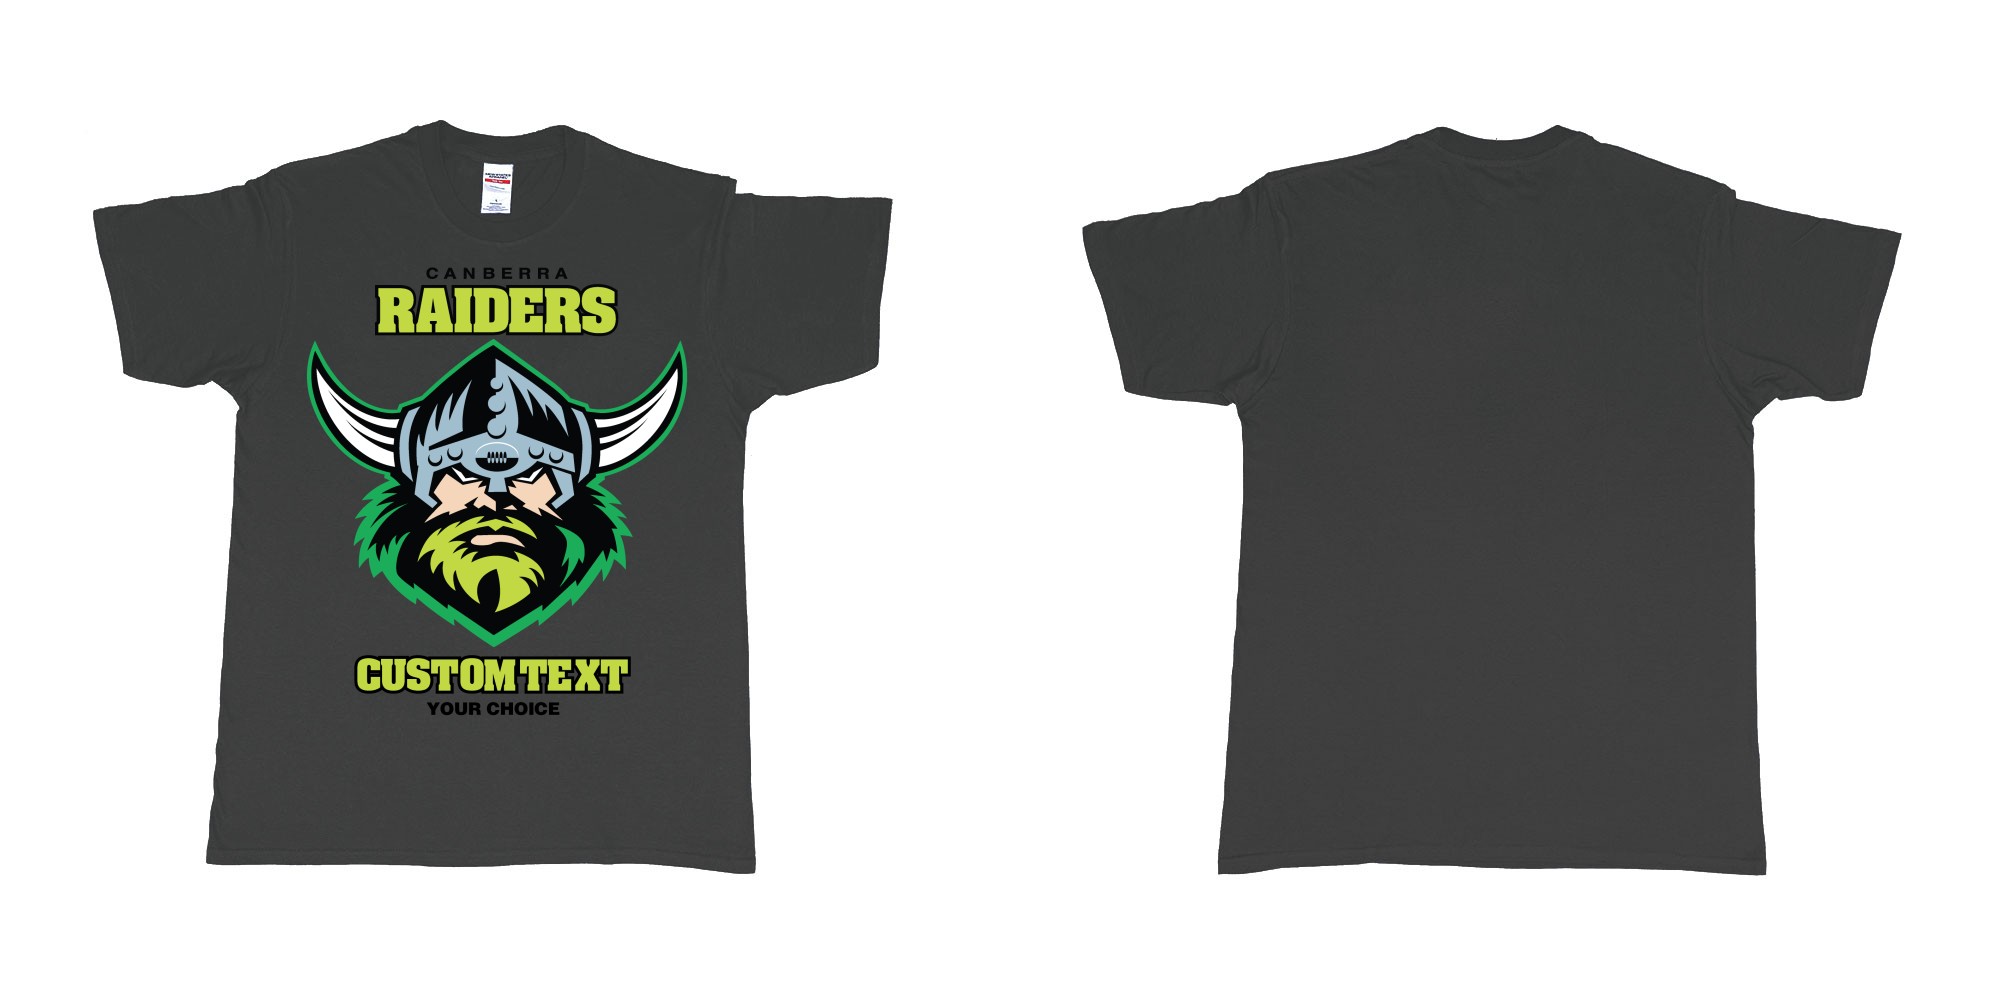 Custom tshirt design canberra raiders nrl logo own printed text near you in fabric color black choice your own text made in Bali by The Pirate Way